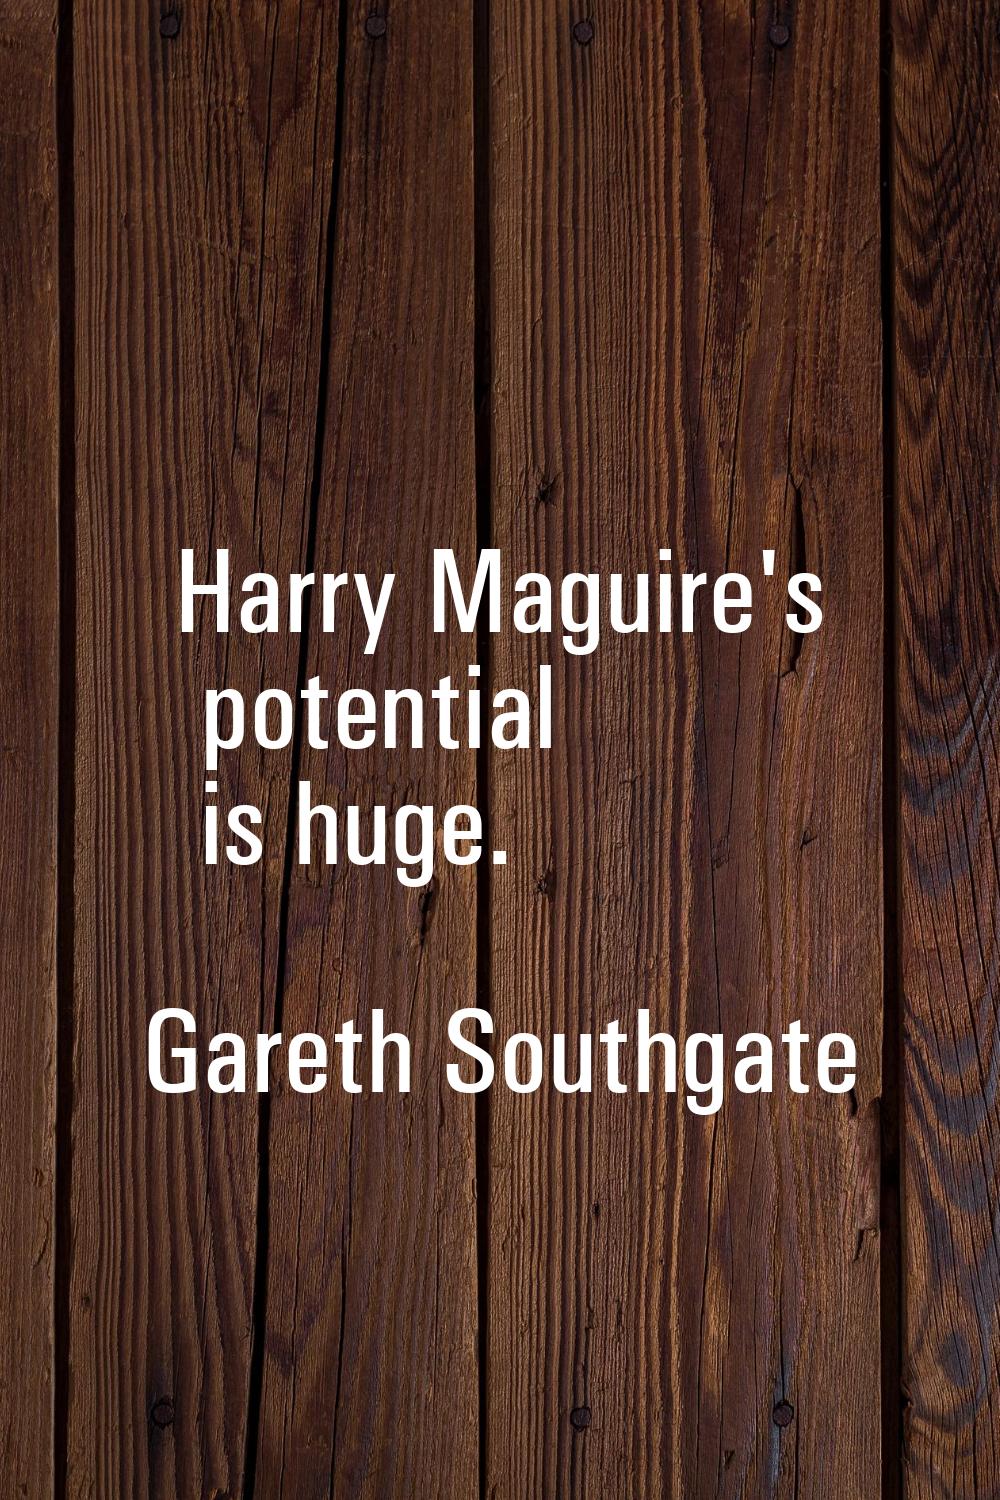 Harry Maguire's potential is huge.